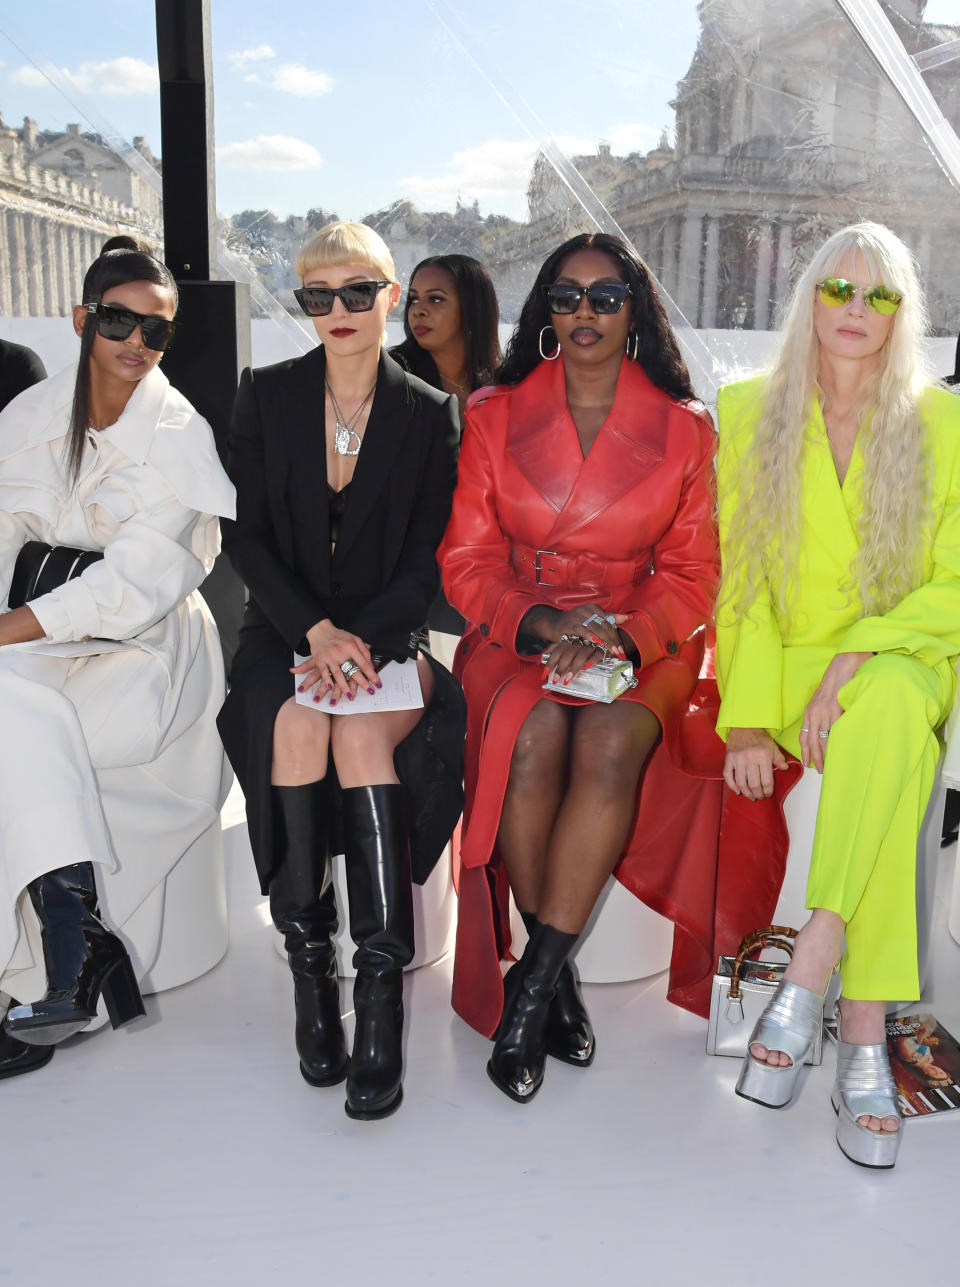 LONDON, ENGLAND - OCTOBER 10: (L to R) Ramla Ali, Pom Klementieff, Tiwa Savage and Kristen McMenamy attend the Alexander McQueen SS23 Womenswear show at the Old Royal Naval College on October 11, 2022 in Greenwich, England. (Photo by David M. Benett/Dave Benett/Getty Images for Alexander McQueen)